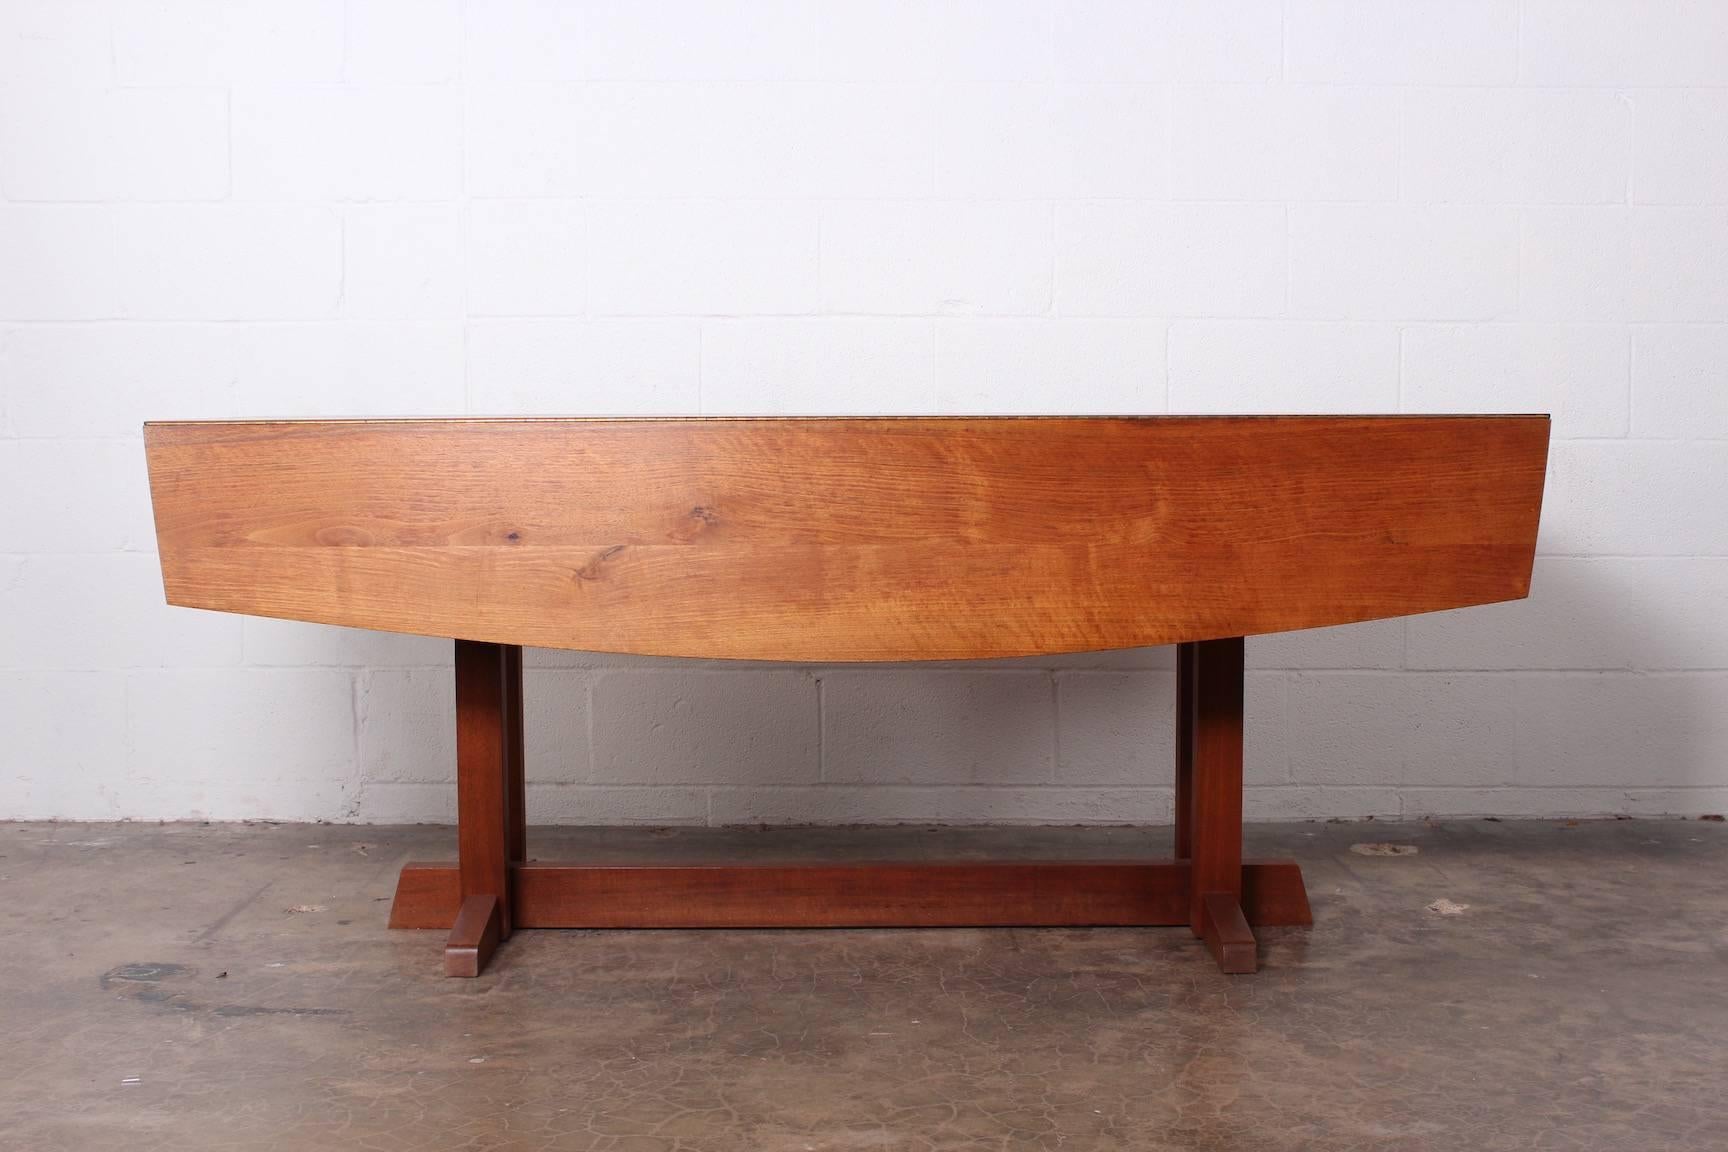 A rare form. Walnut drop-leaf dining / console table with Frenchman's cove base, 1967. Sold with a copy of the original invoice.
Measures: 72.25 x 28.5 x 24.5 W (closed) 48.25 W (open).